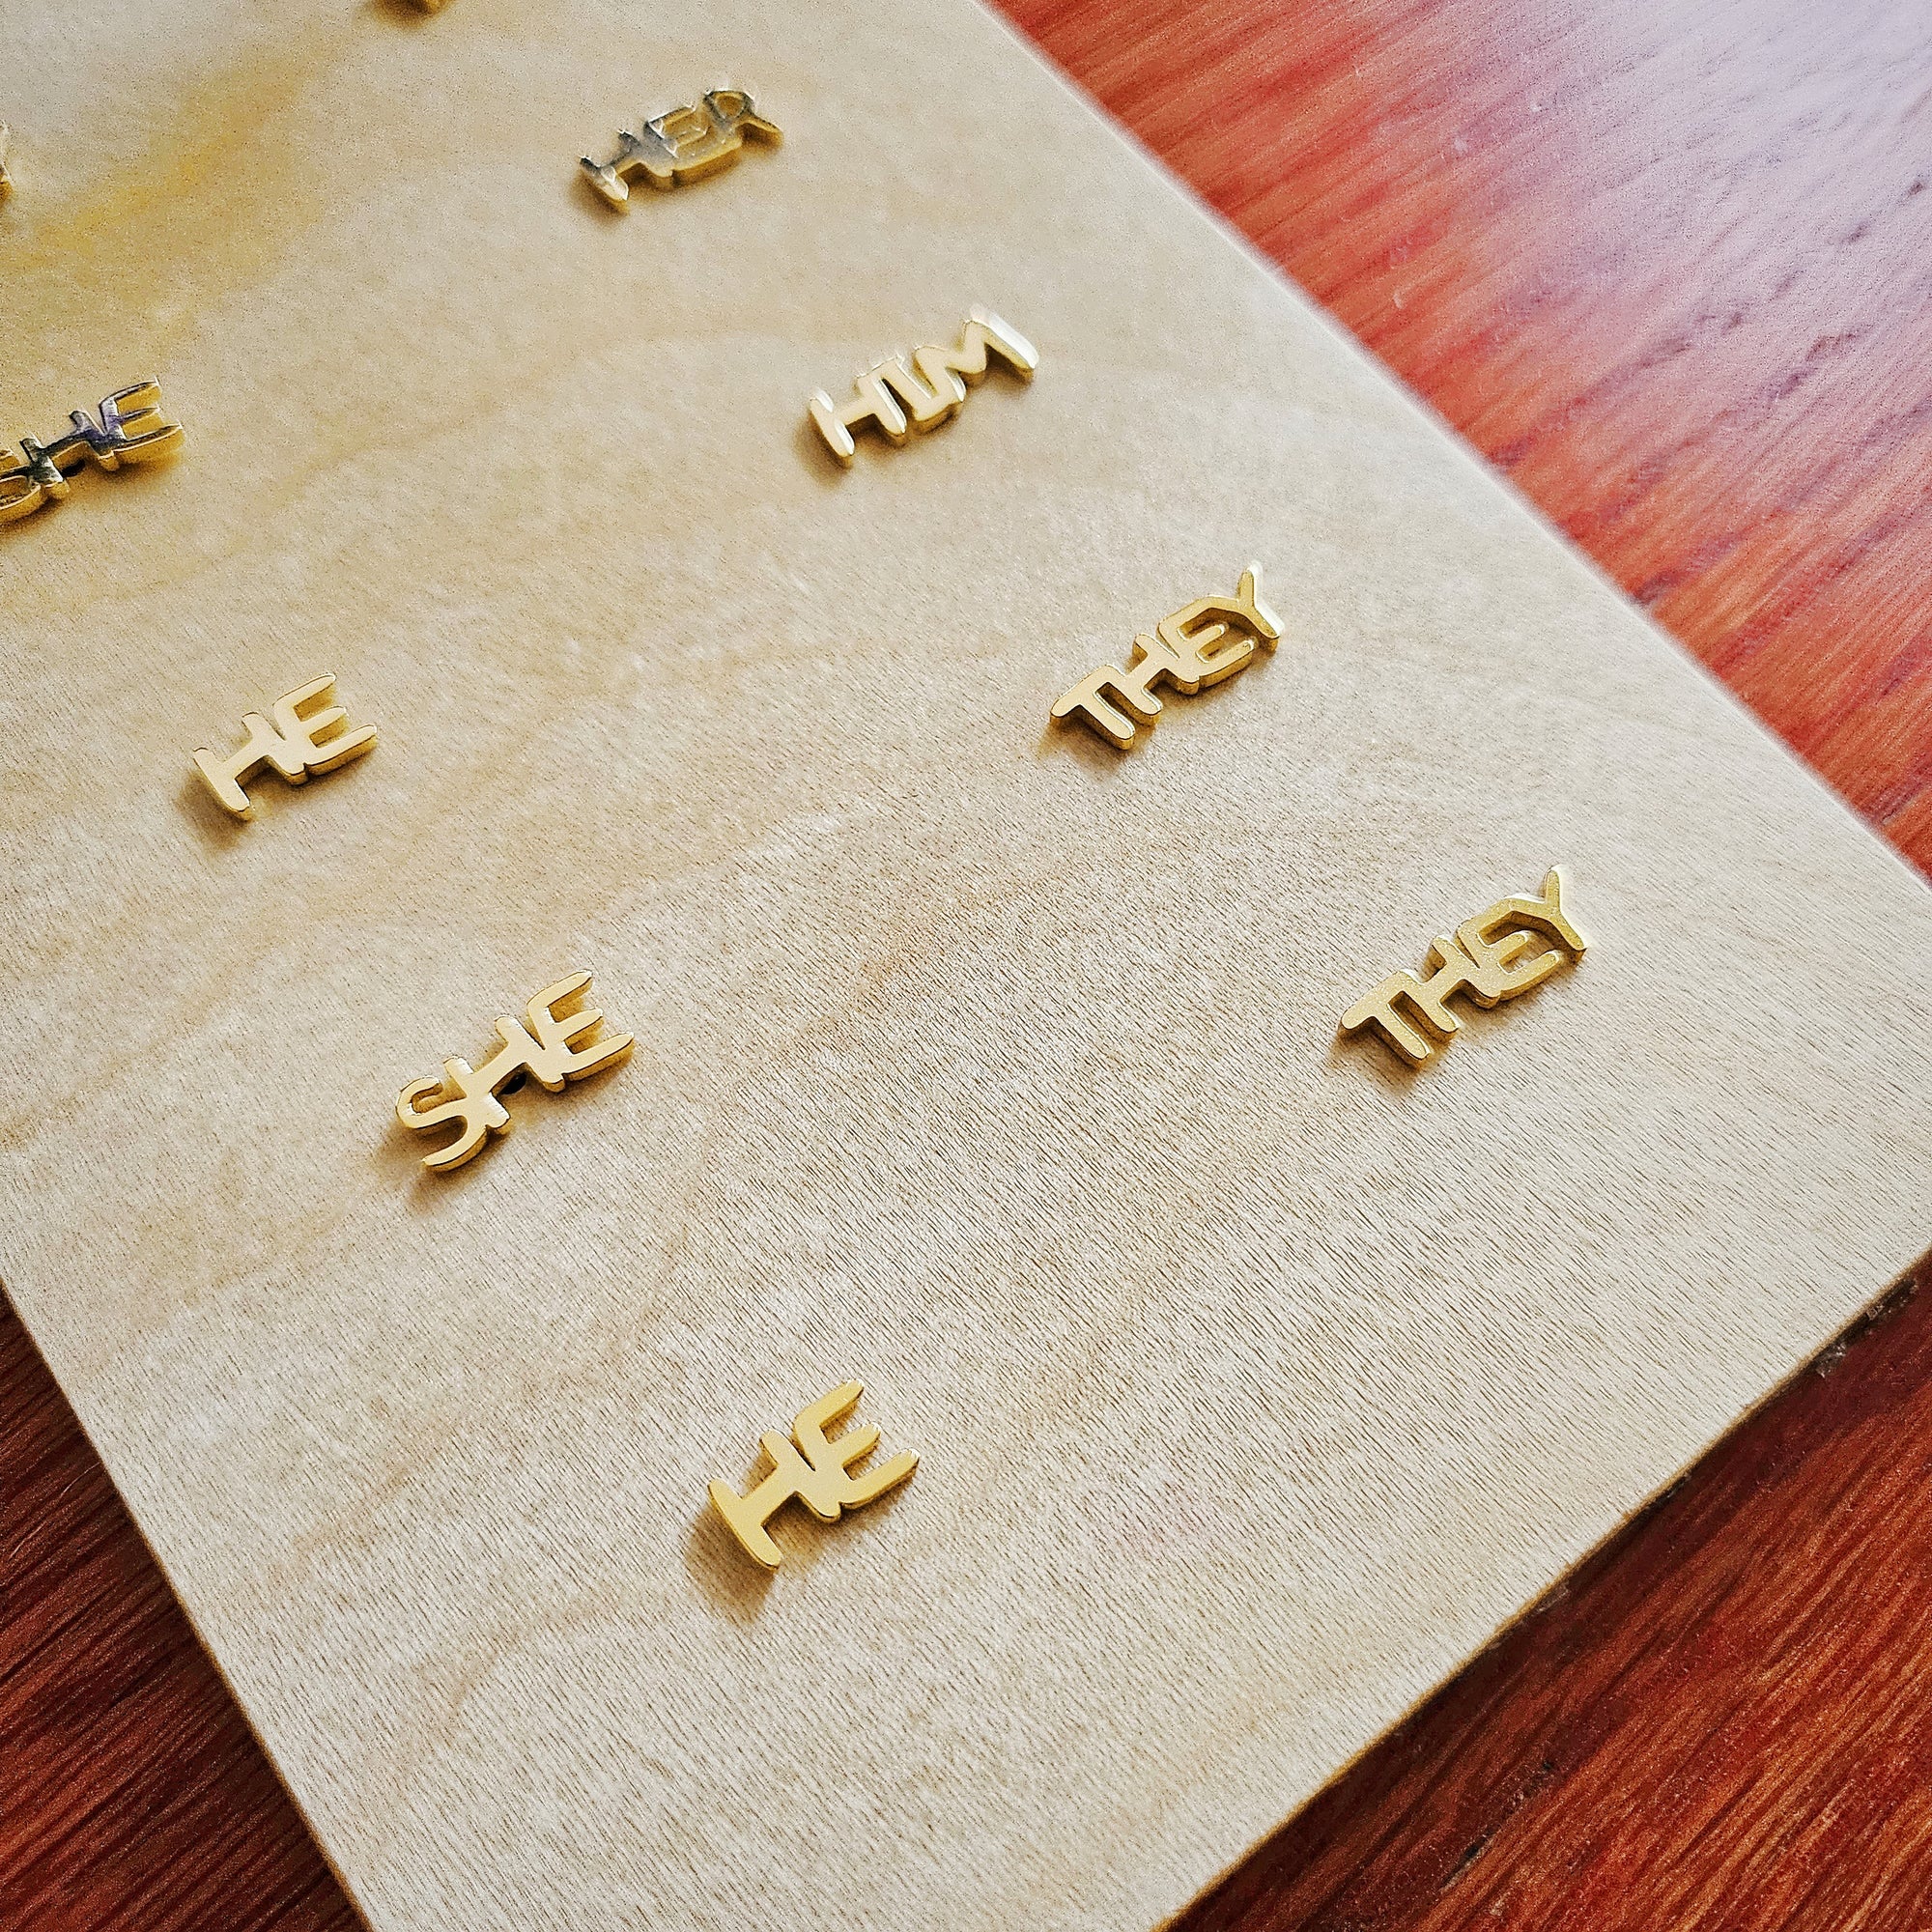 Gold Pronoun Stud Earrings - he/they or they/he